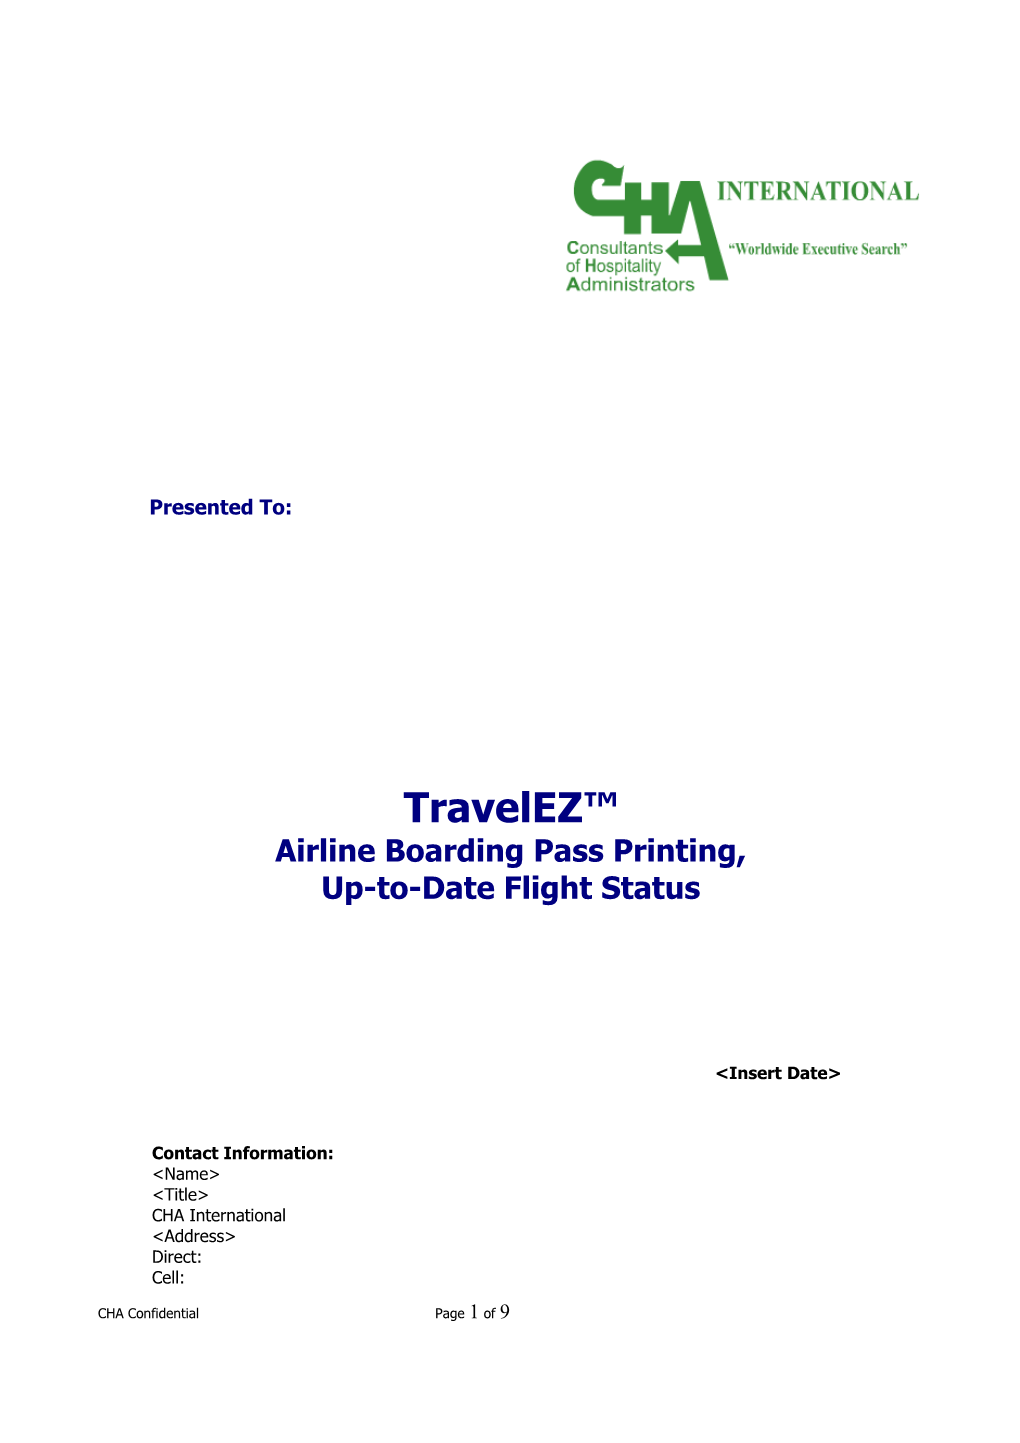 Airline Boarding Pass Printing